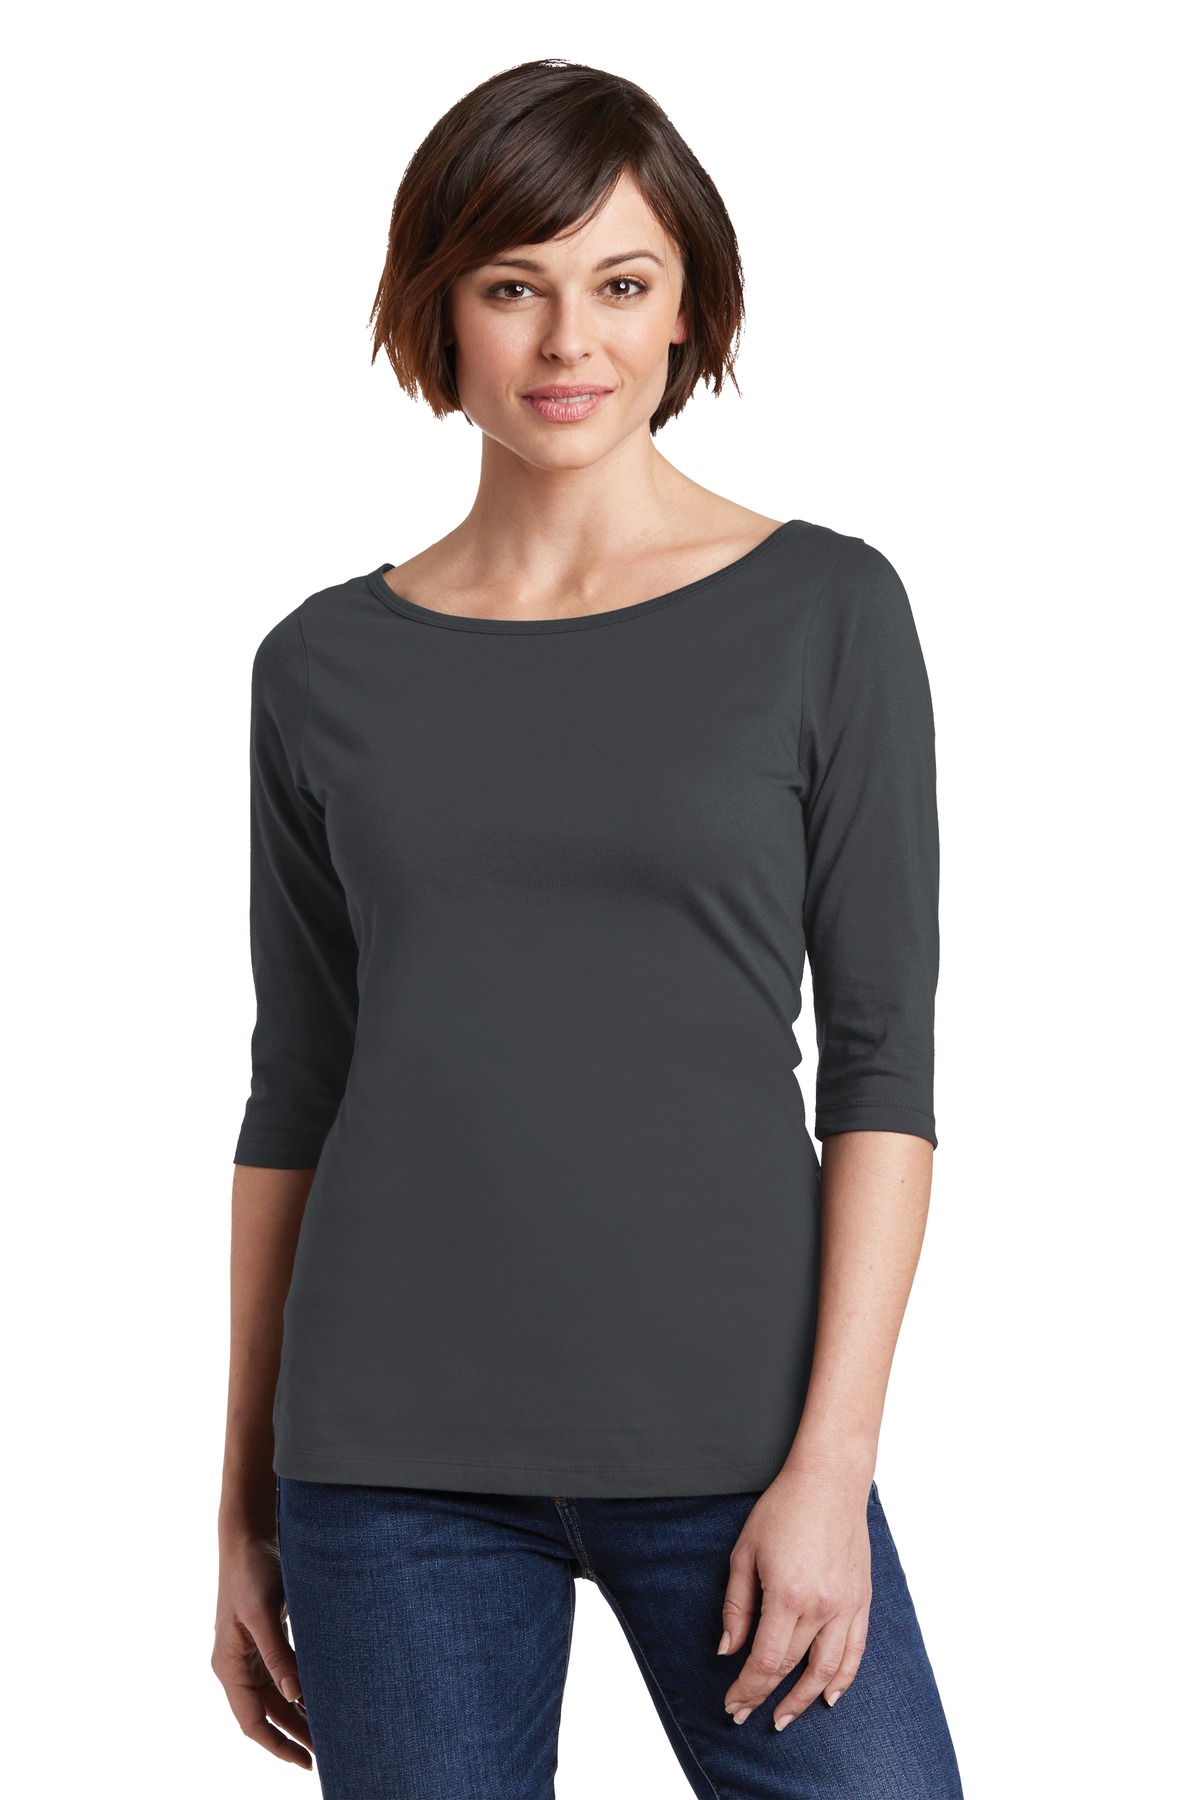 District Ladies Perfect Weight  DM107L - 3/4 Sleeve Tee